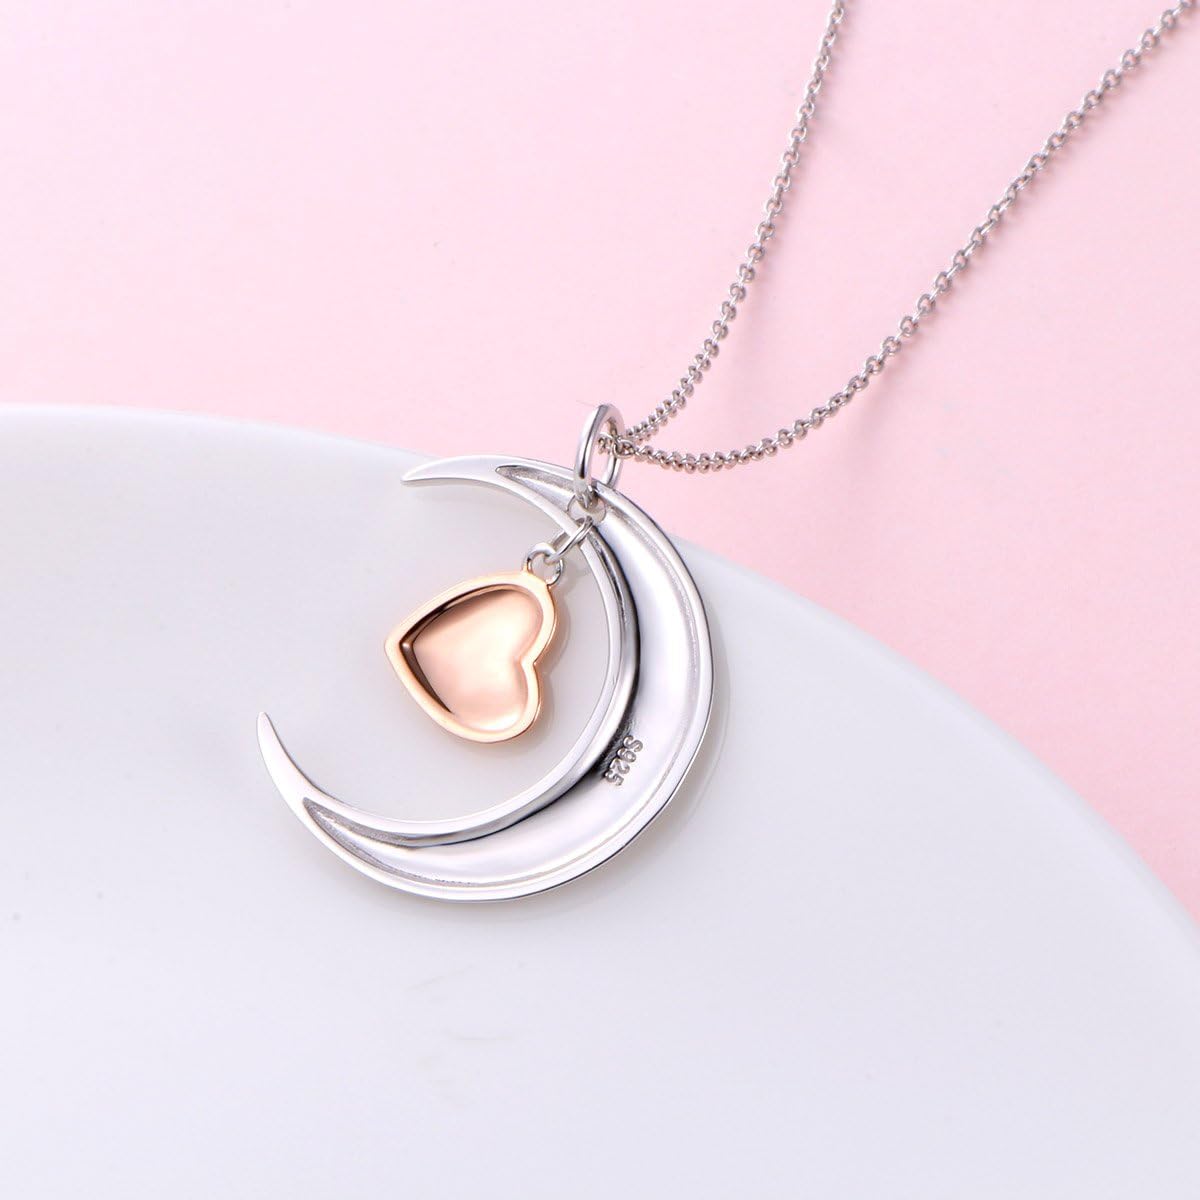 Sterling Silver For Mom Necklace Mothers Day Gift